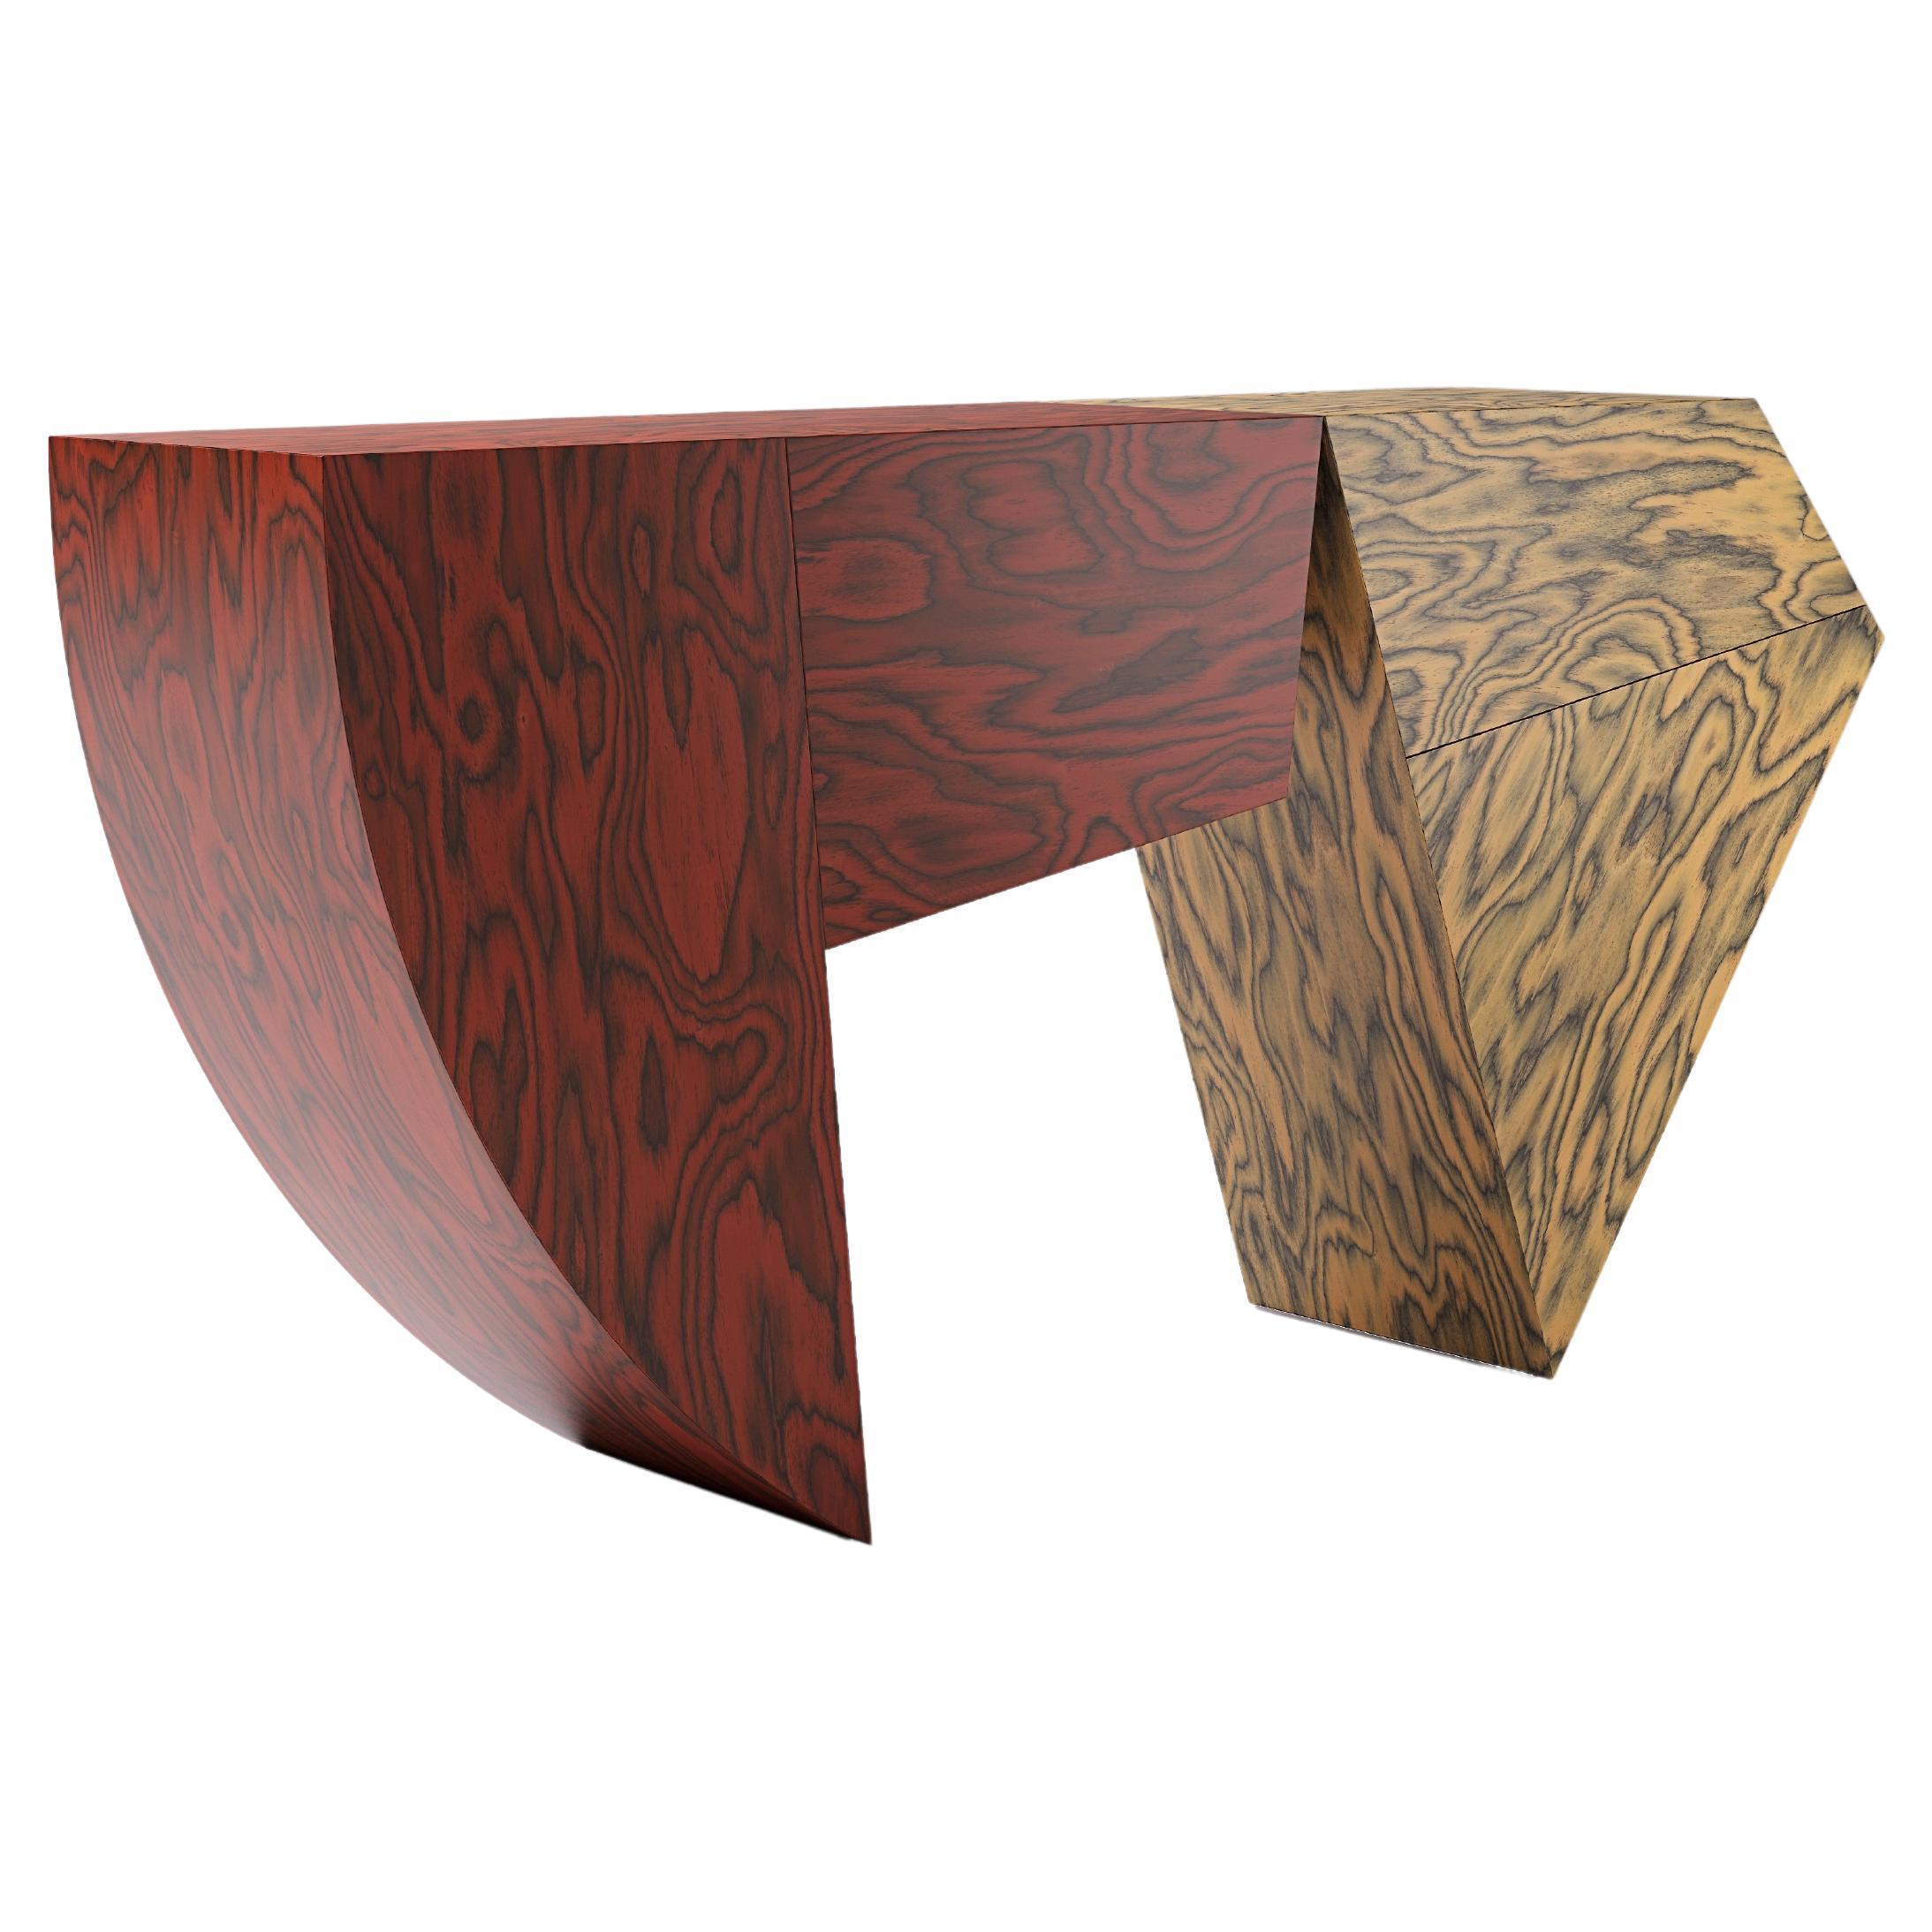 Lola sculptural curved wood sideboard by Sebastiano Bottos For Sale